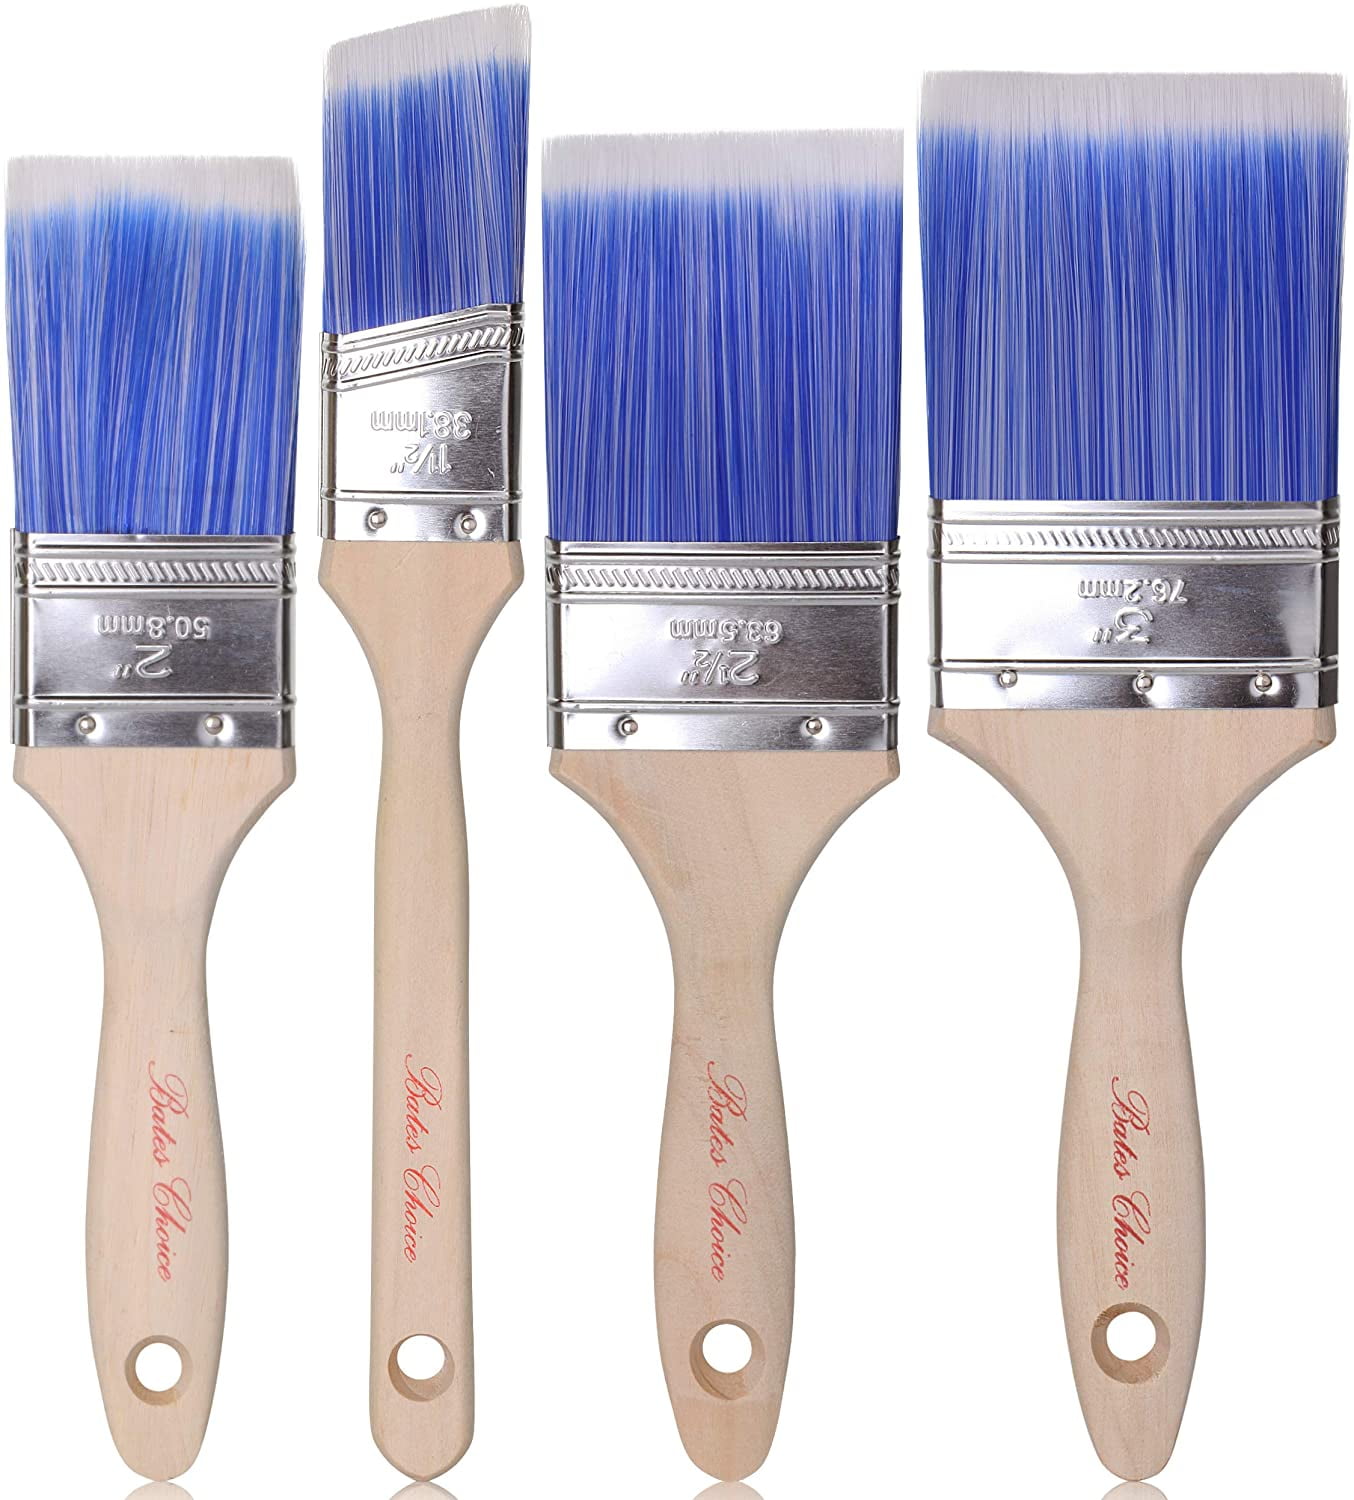 Paint Brushes Brush Set 4 4 Pack Stains & Wall Painting Acrylic - Good qulaity with Wooden Handle Synthetic Bristles Can Be Used with Varnishes